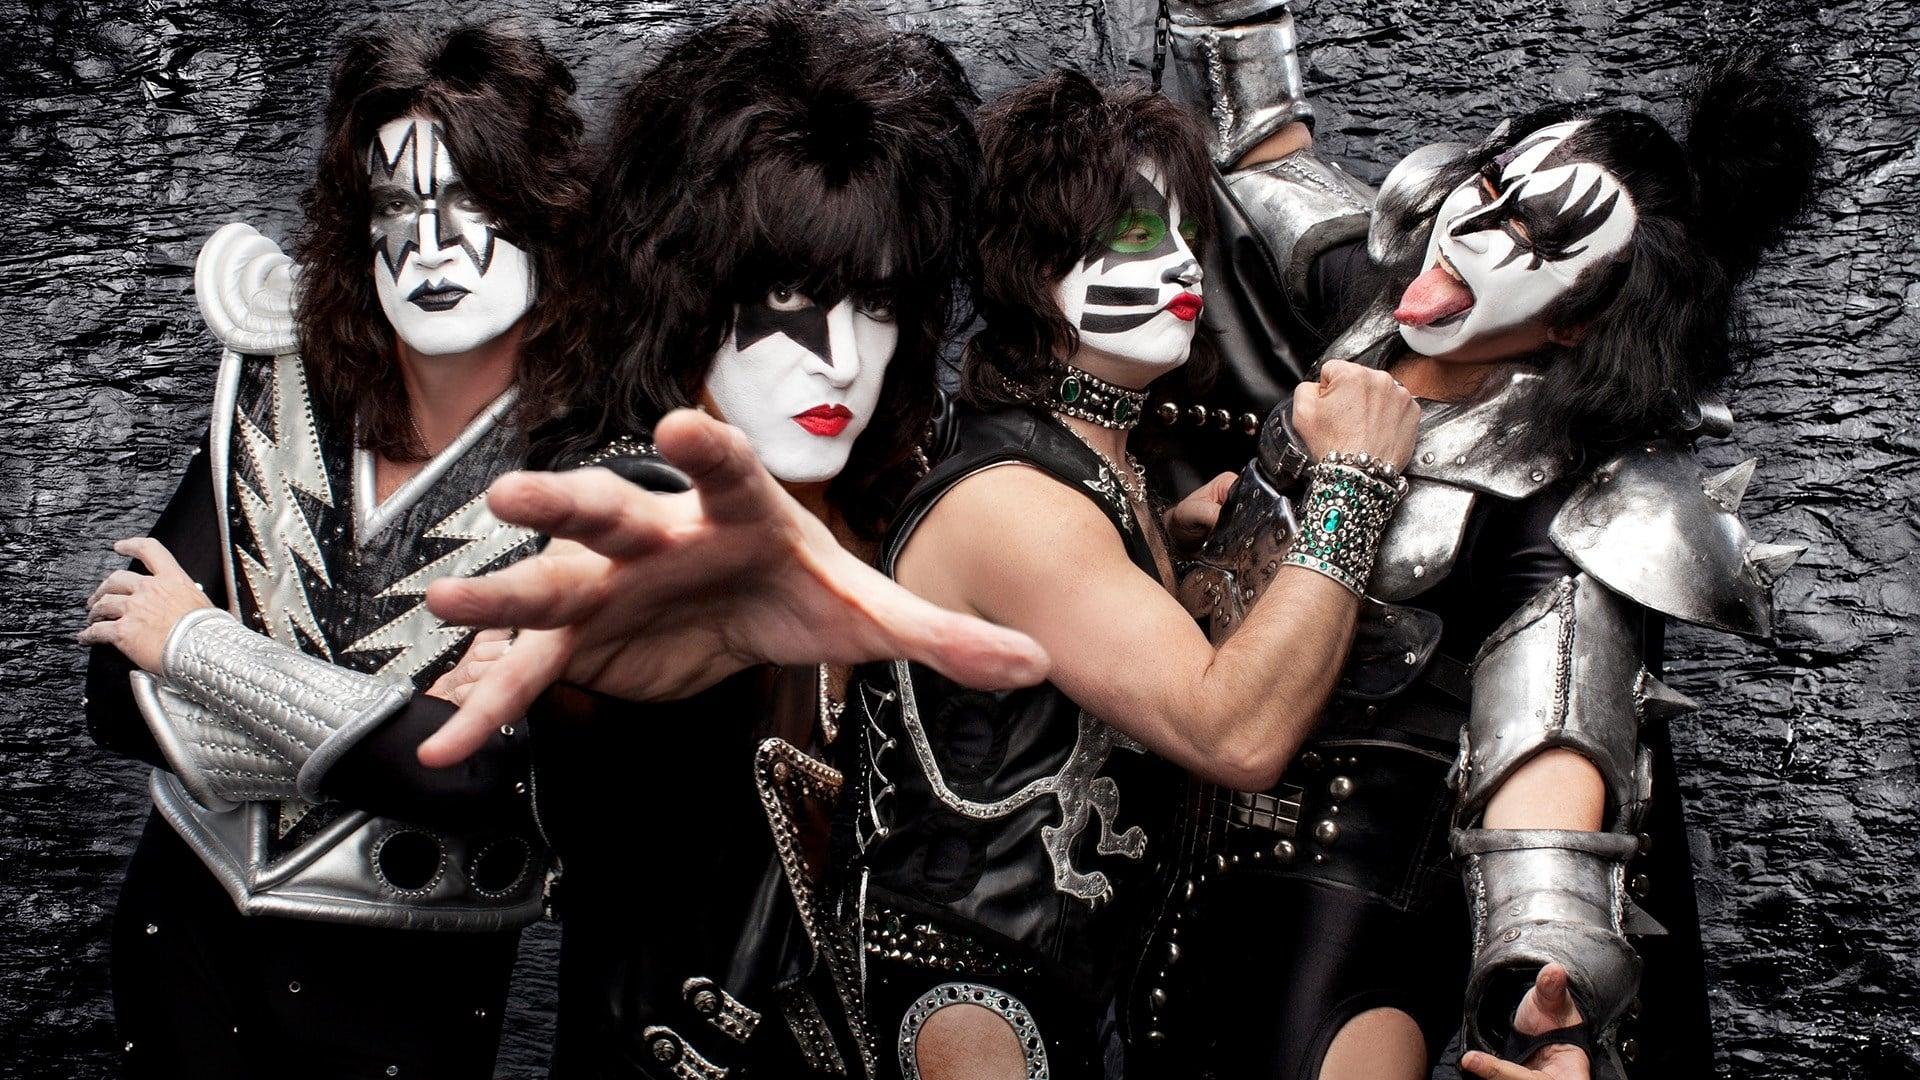 The Kiss Monster World Tour: Live from Europe backdrop